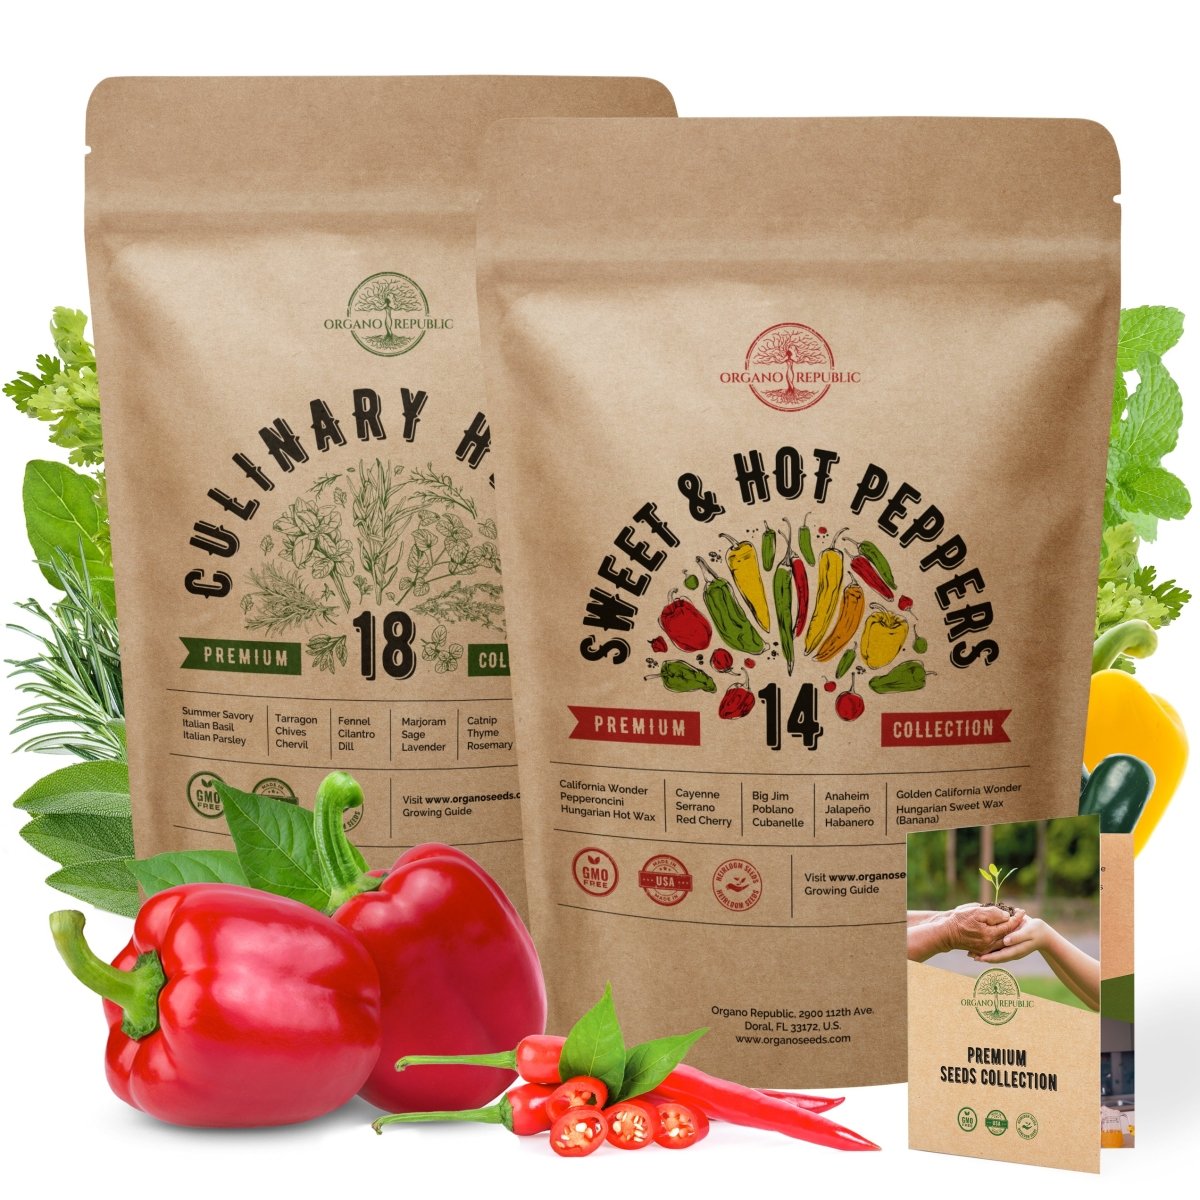 18 Most Popular Culinary Herbs and 14 Hot and Sweet Peppers Non-GMO Heirloom Seeds - Organo Republic